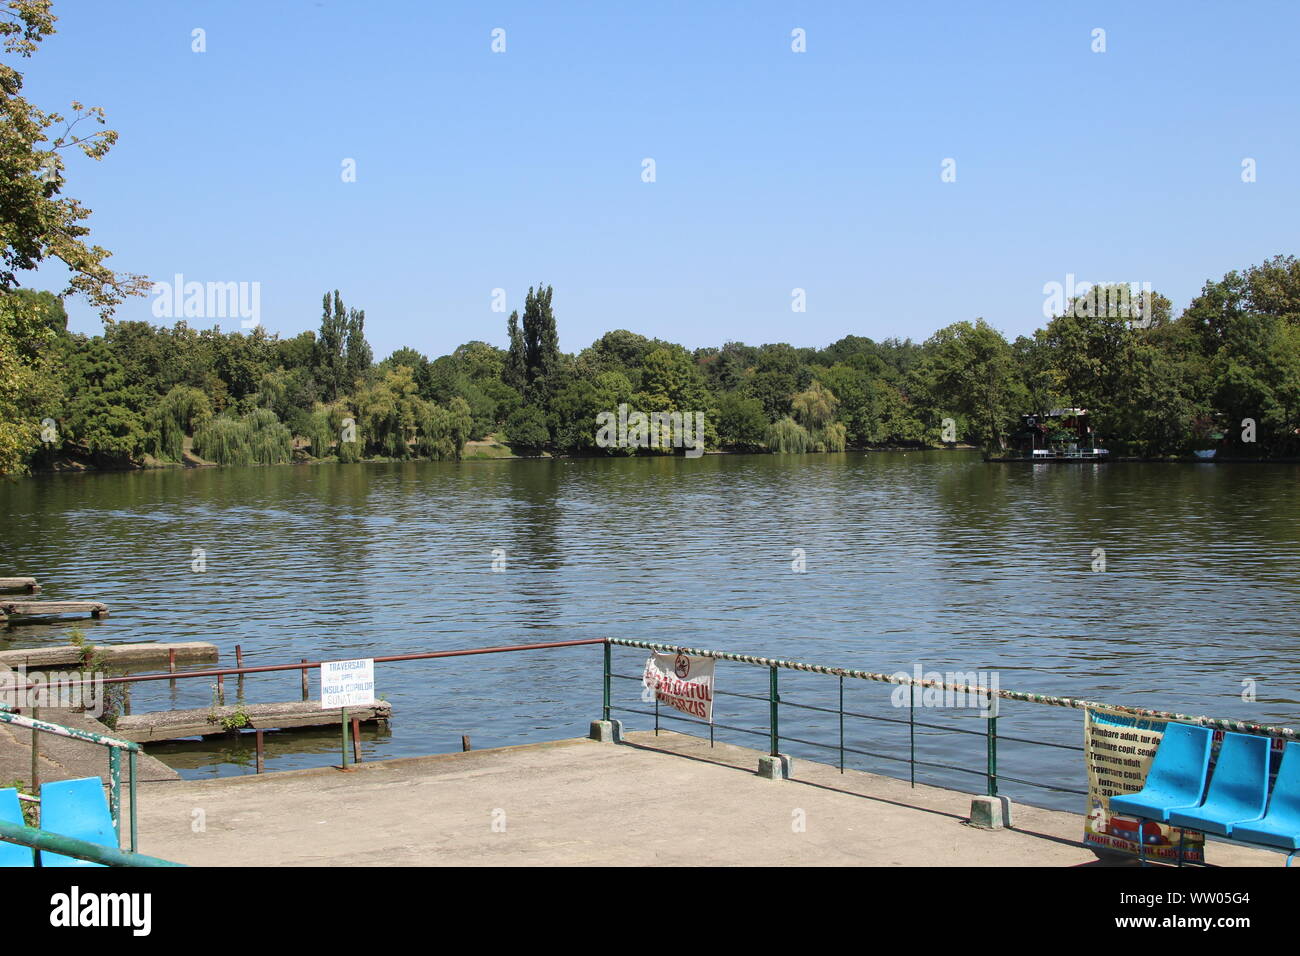 Images from Herastrau Park Stock Photo